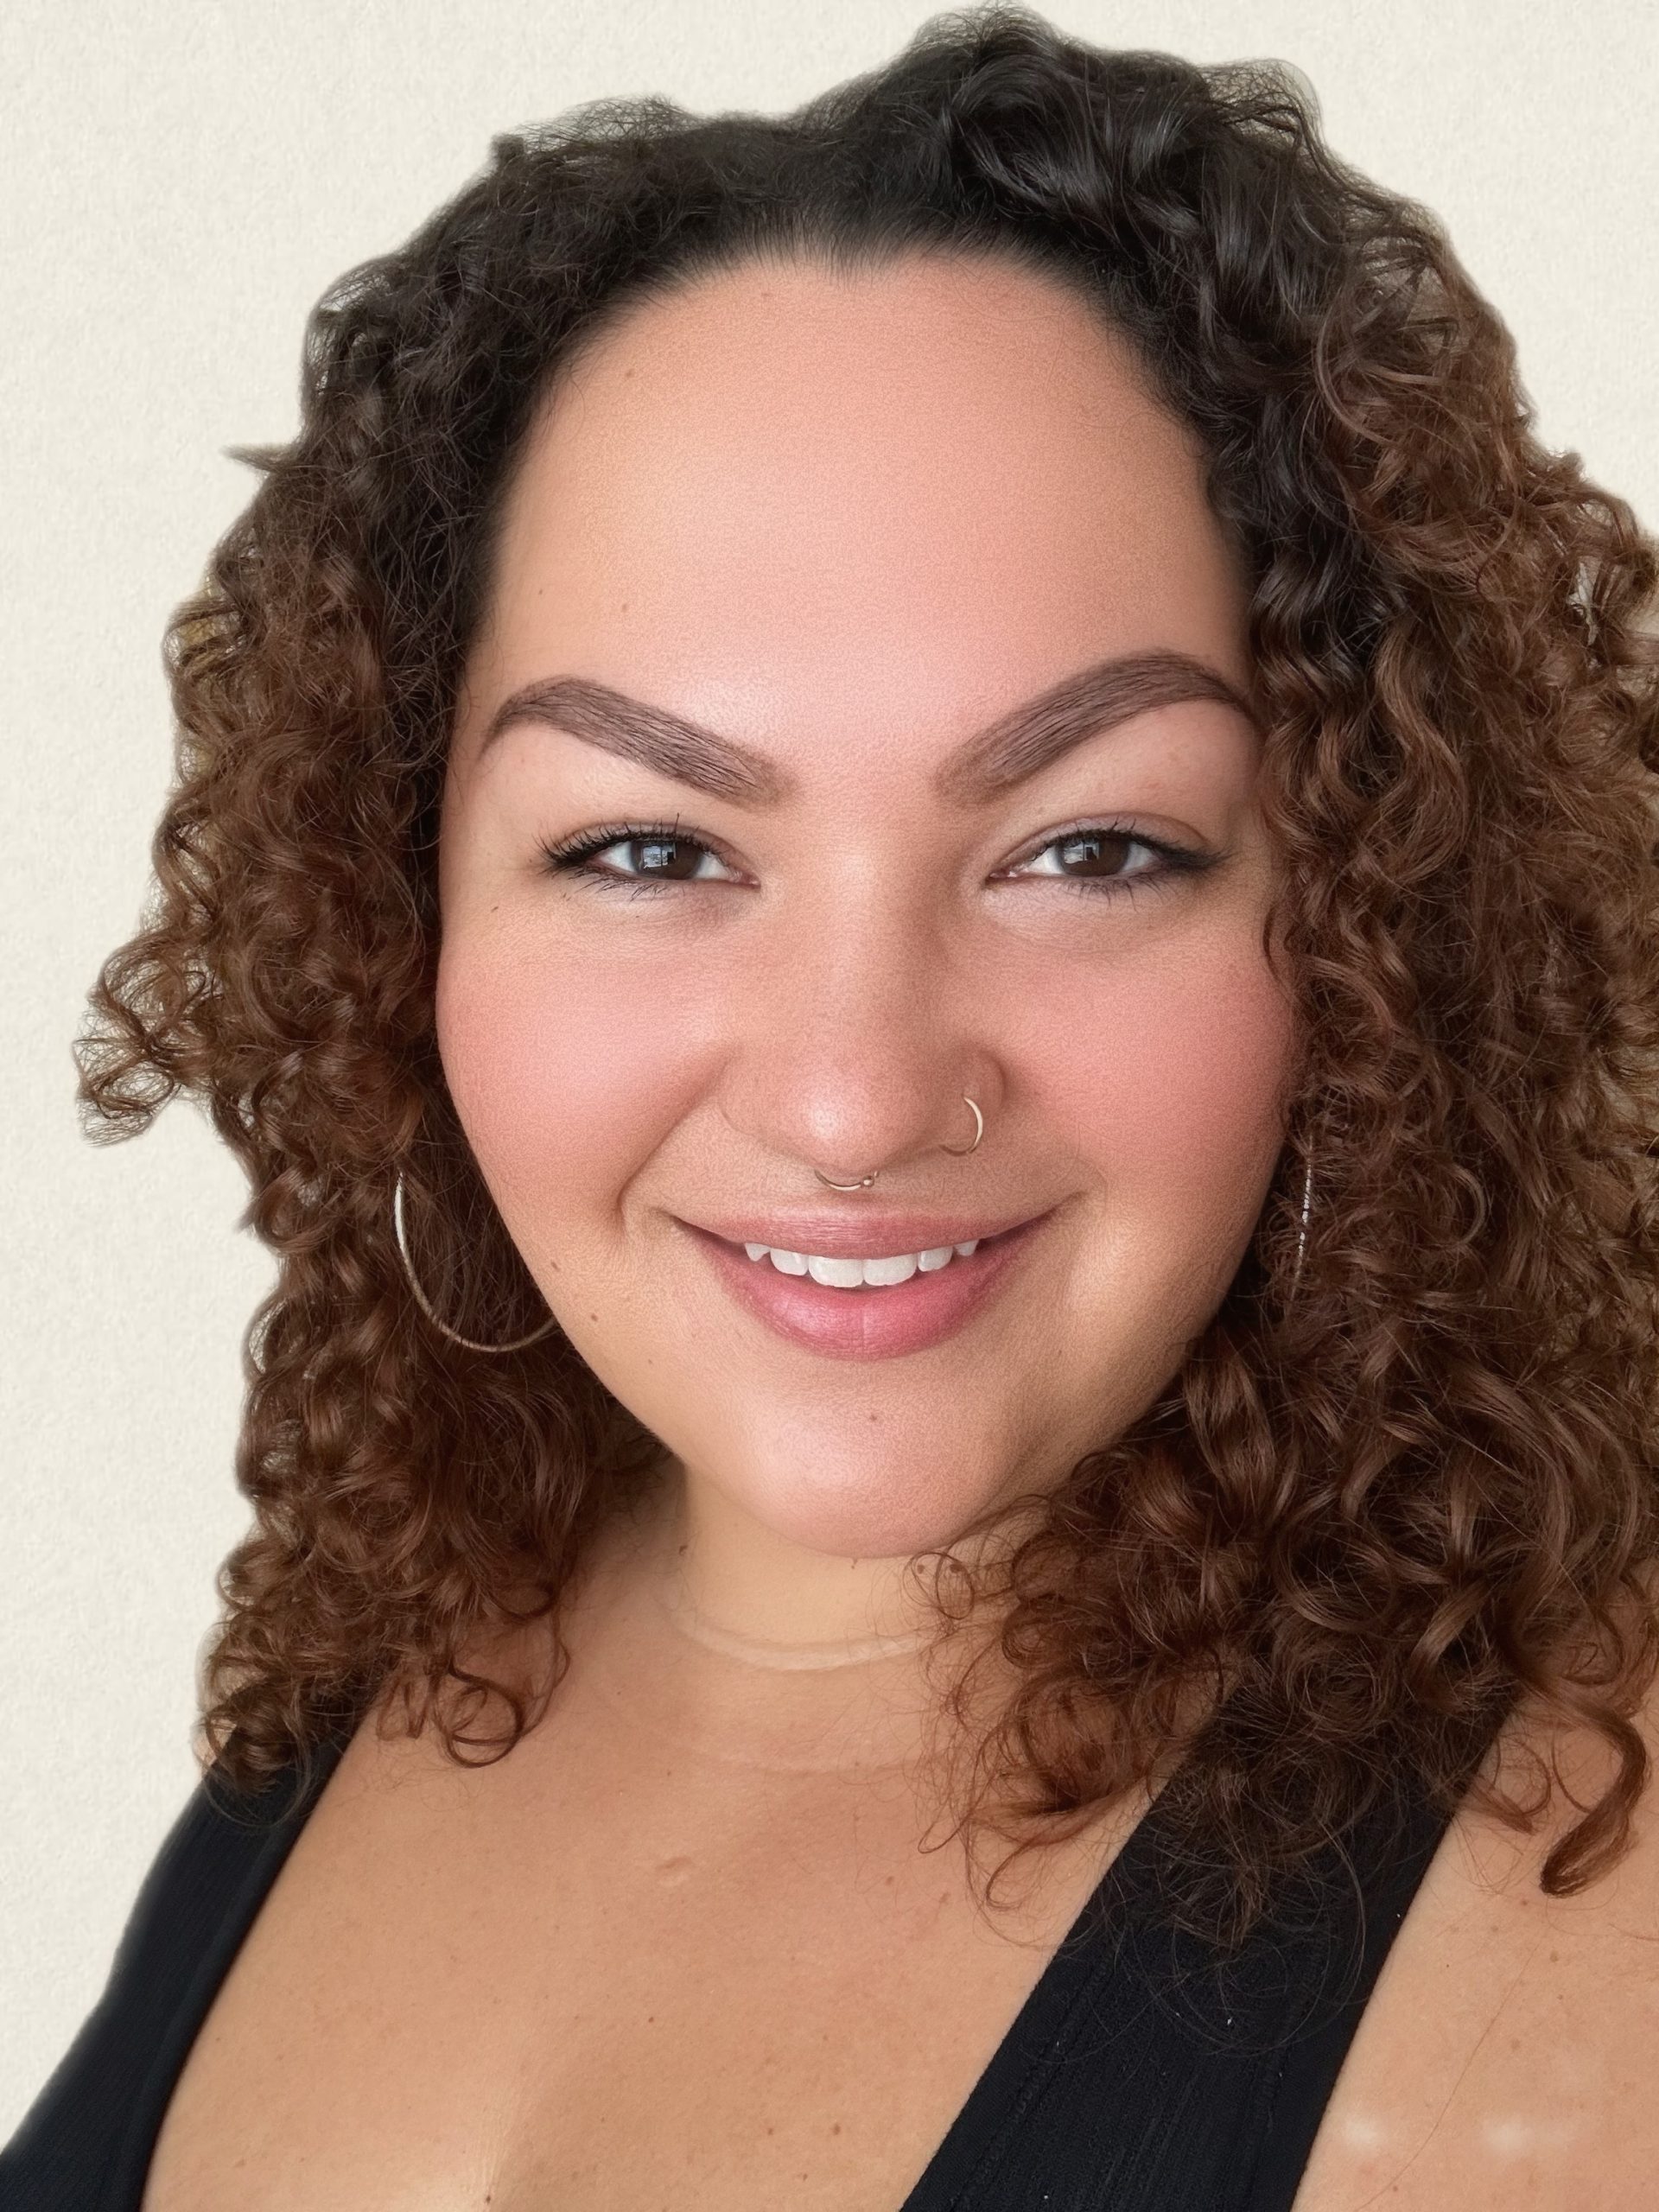 Professional headshot of Natasha. She is a female presenting person with curly hair.